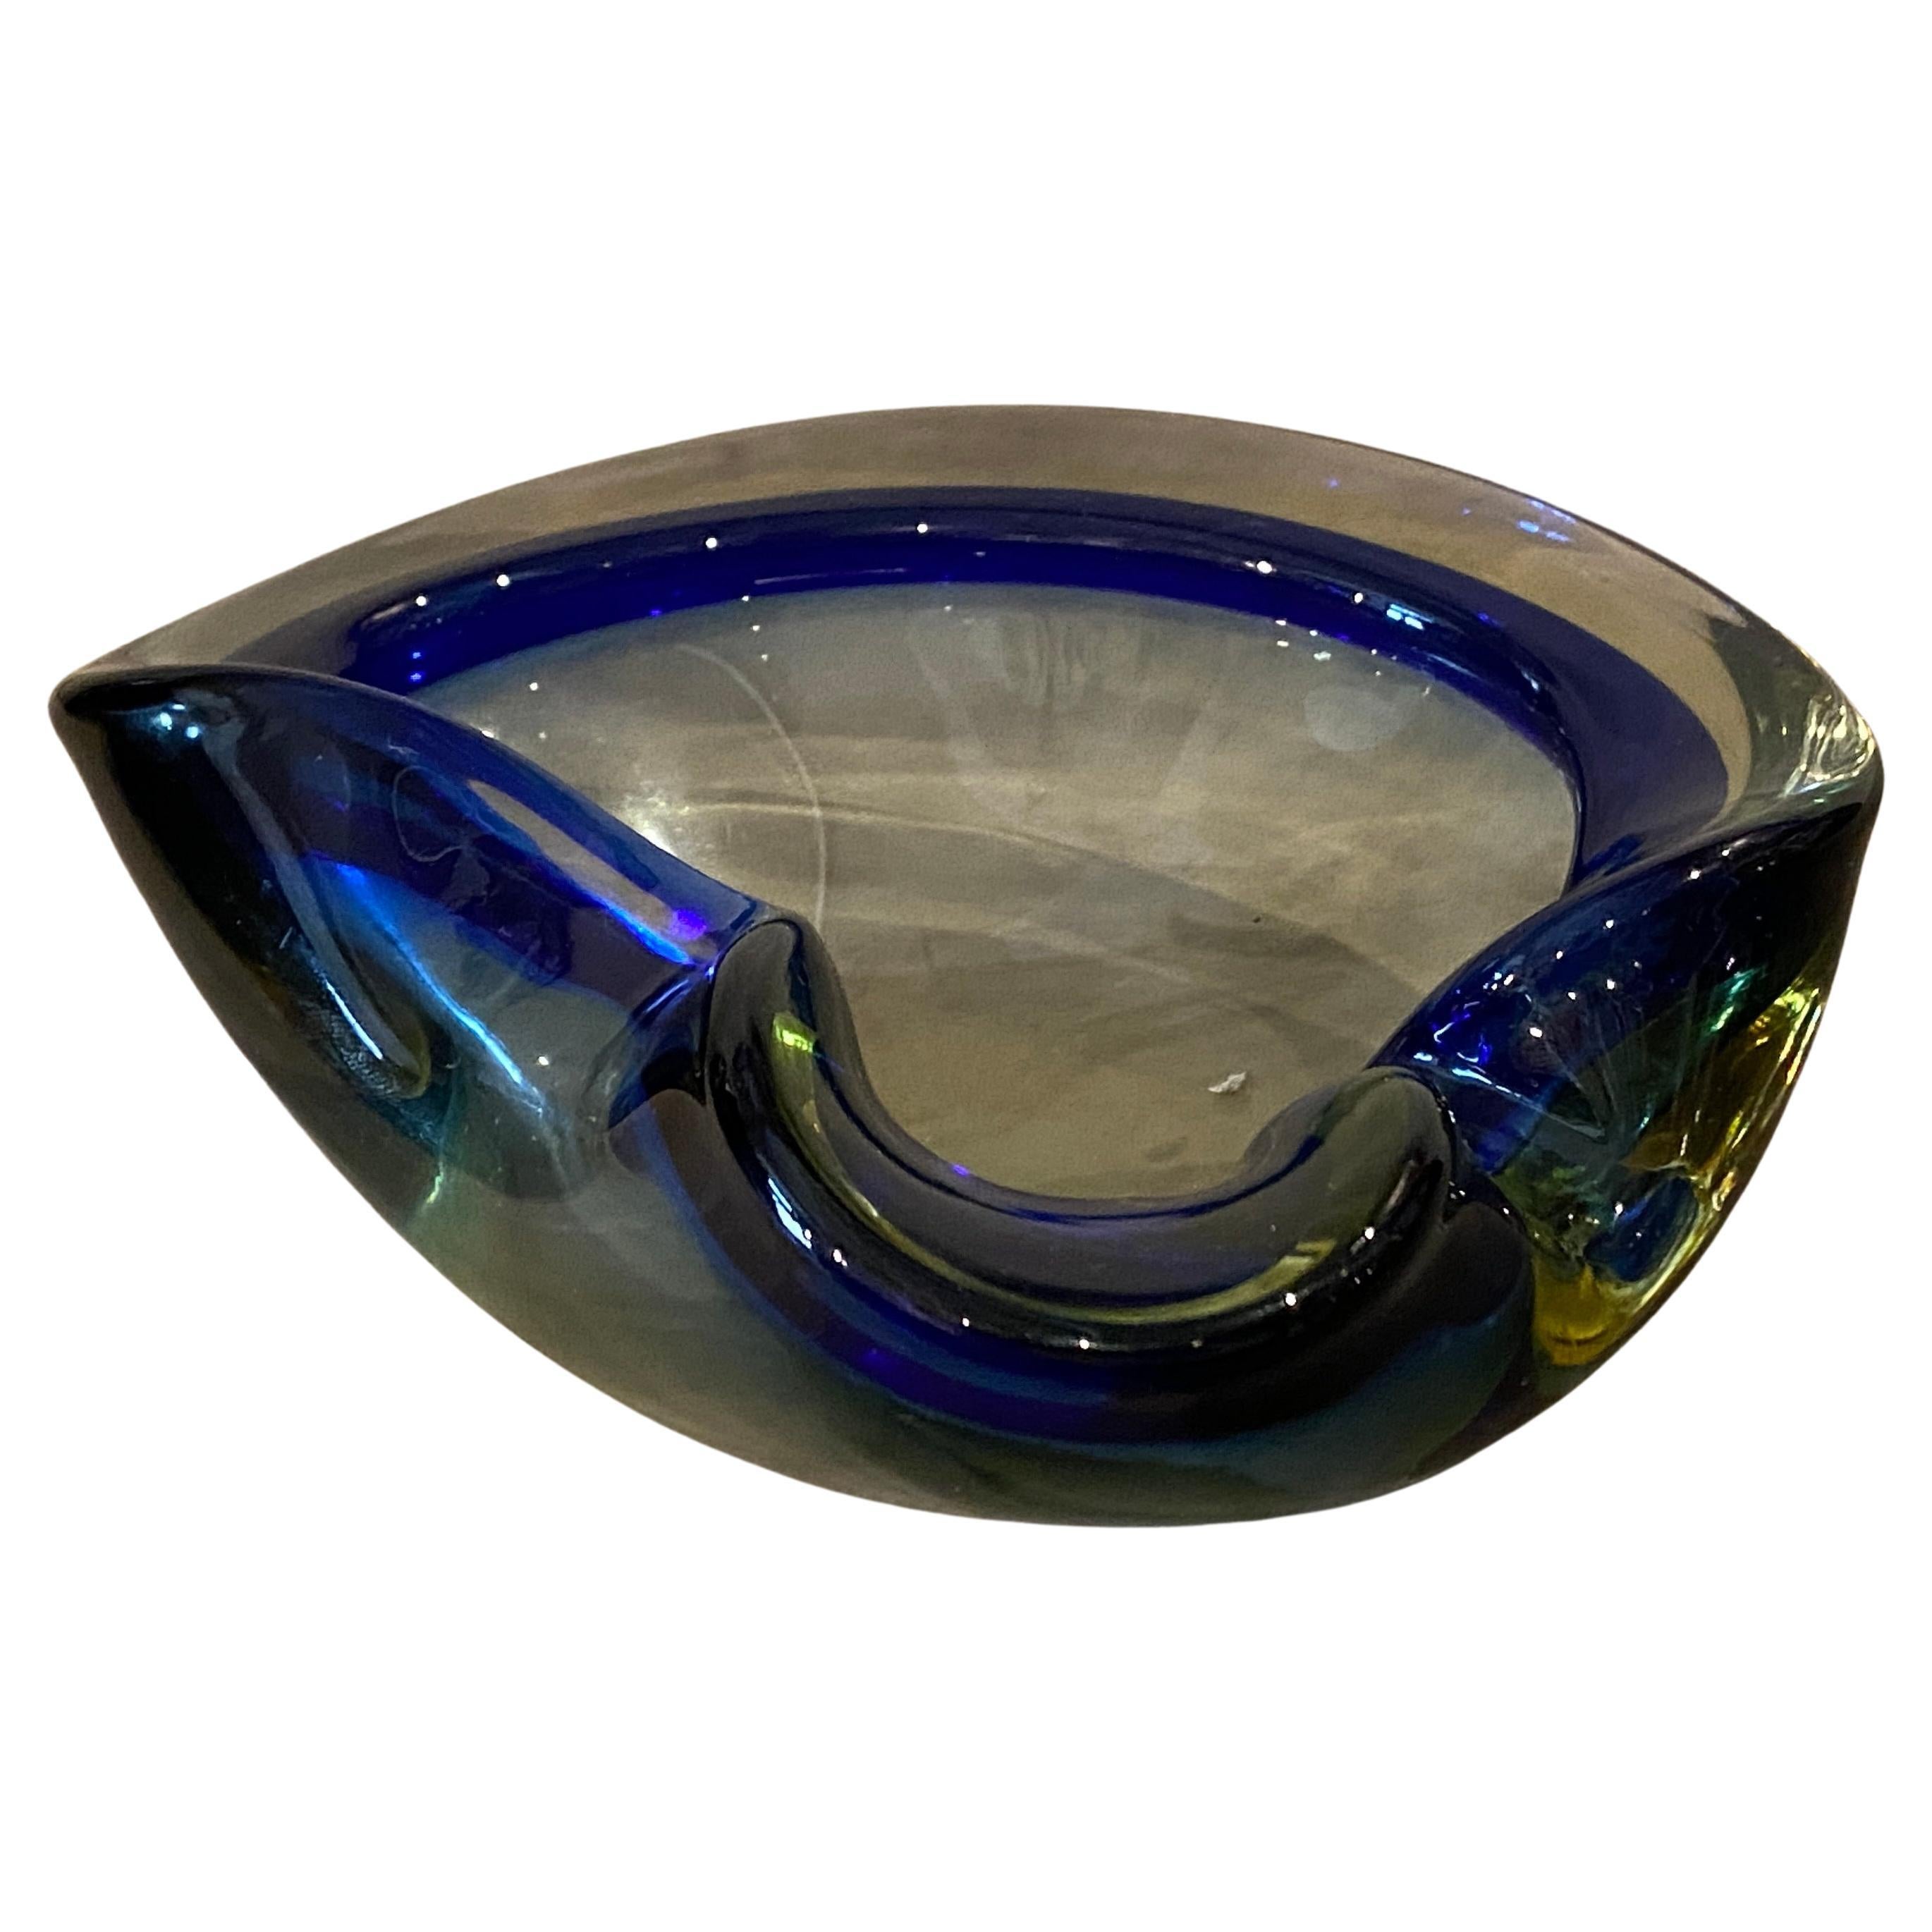 A 1970s Flavio Poli Blue and Green Sommerso Murano Glass Bowl